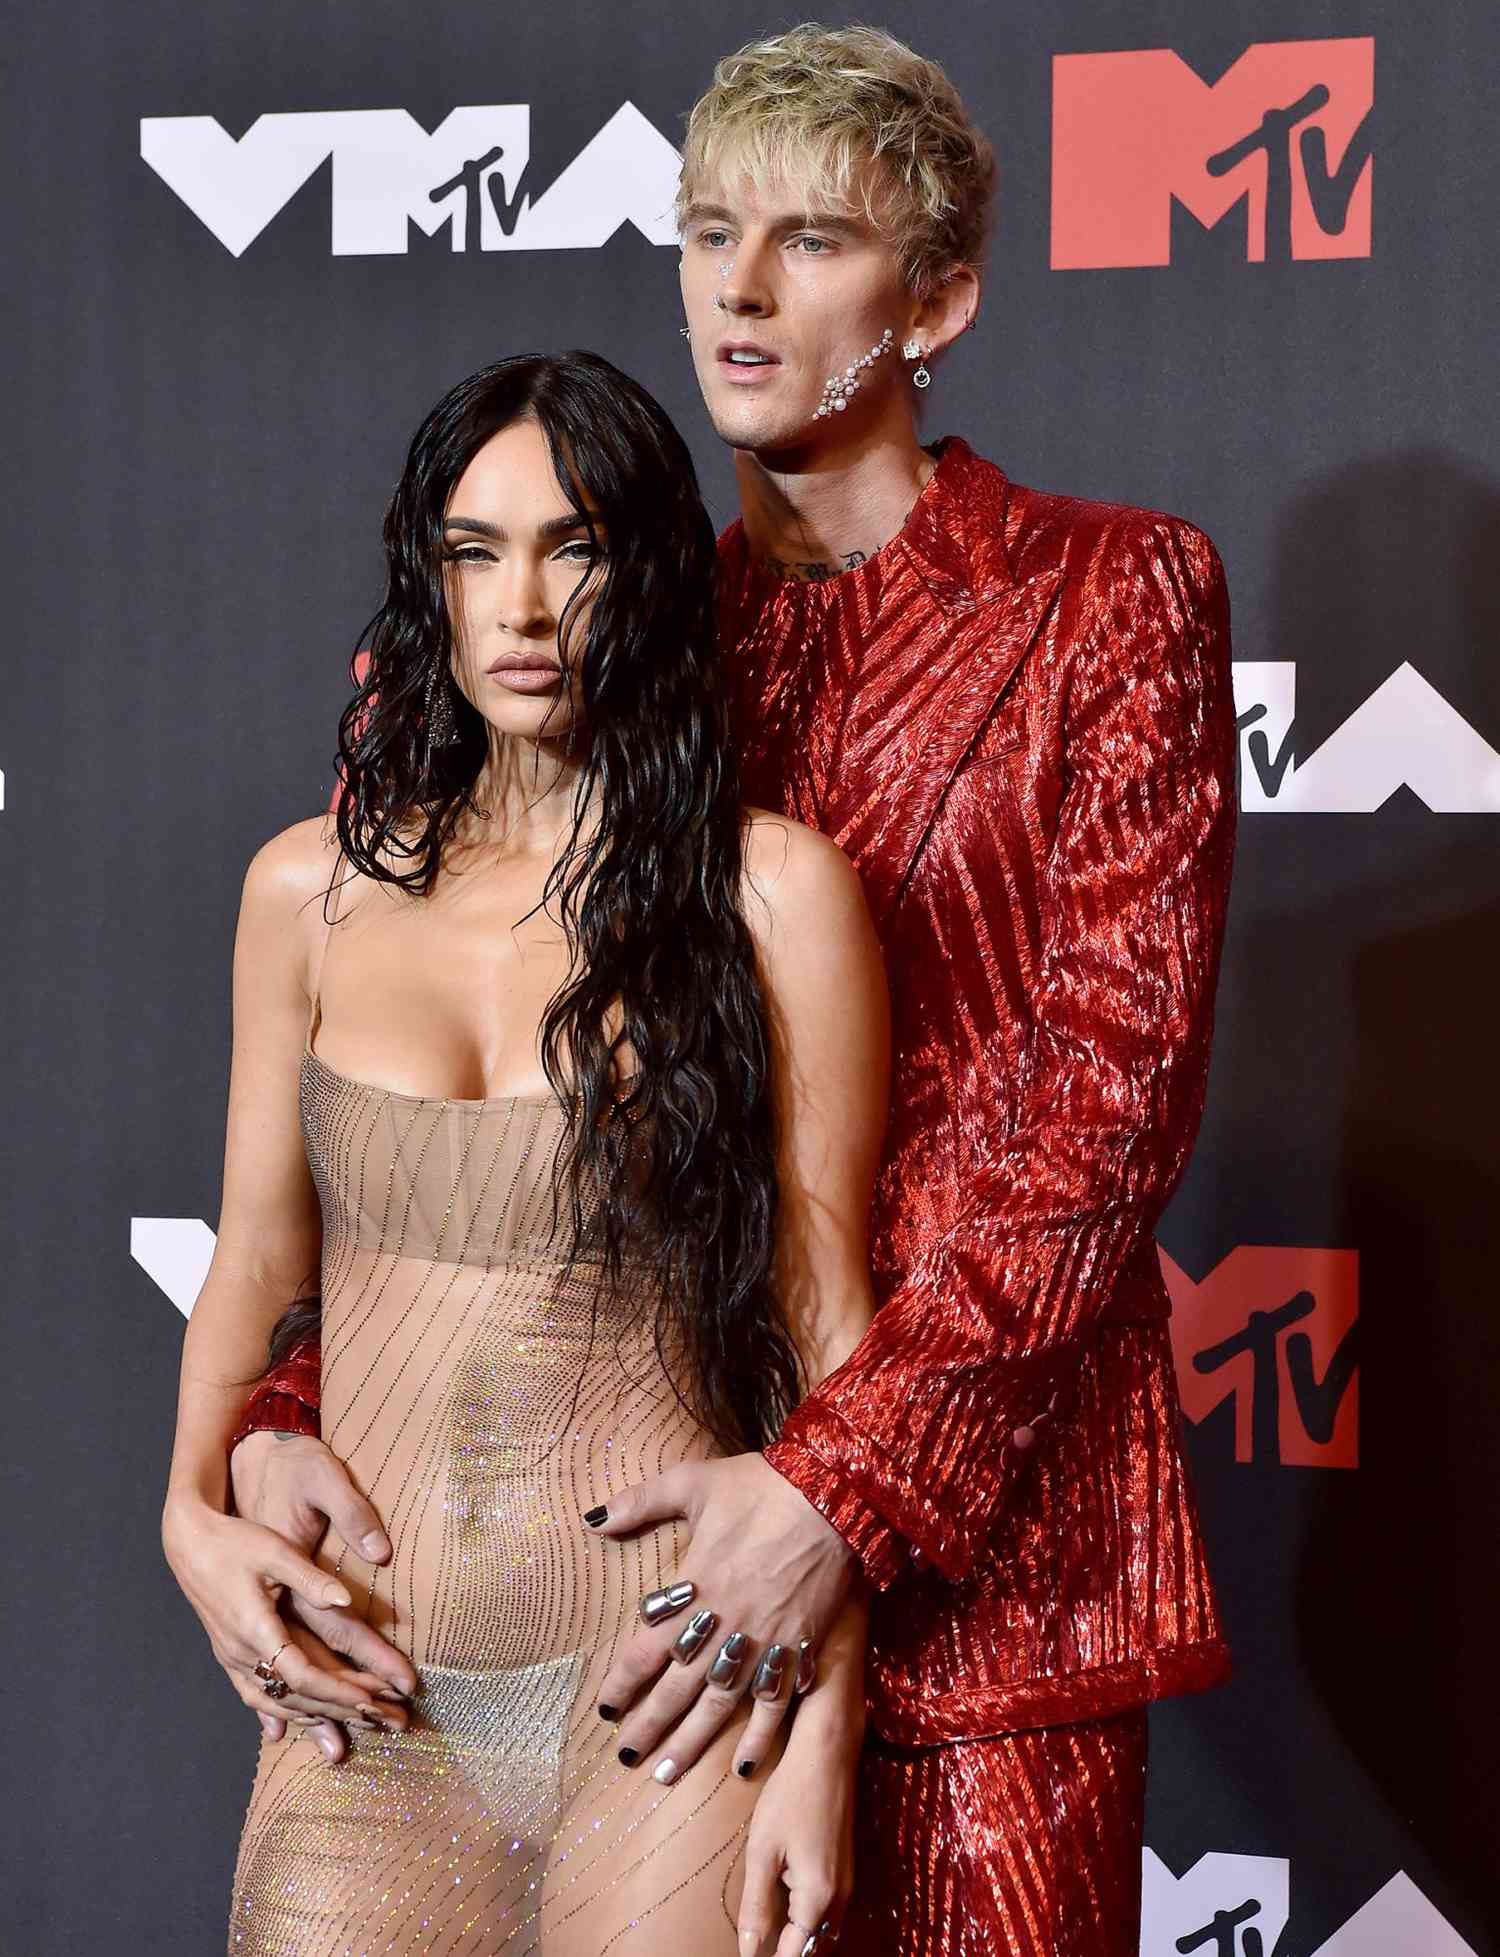 NEW YORK, NEW YORK - SEPTEMBER 12: Megan Fox and Machine Gun Kelly attend the 2021 MTV Video Music Awards at Barclays Center on September 12, 2021 in the Brooklyn borough of New York City. (Photo by Axelle/Bauer-Griffin/FilmMagic)